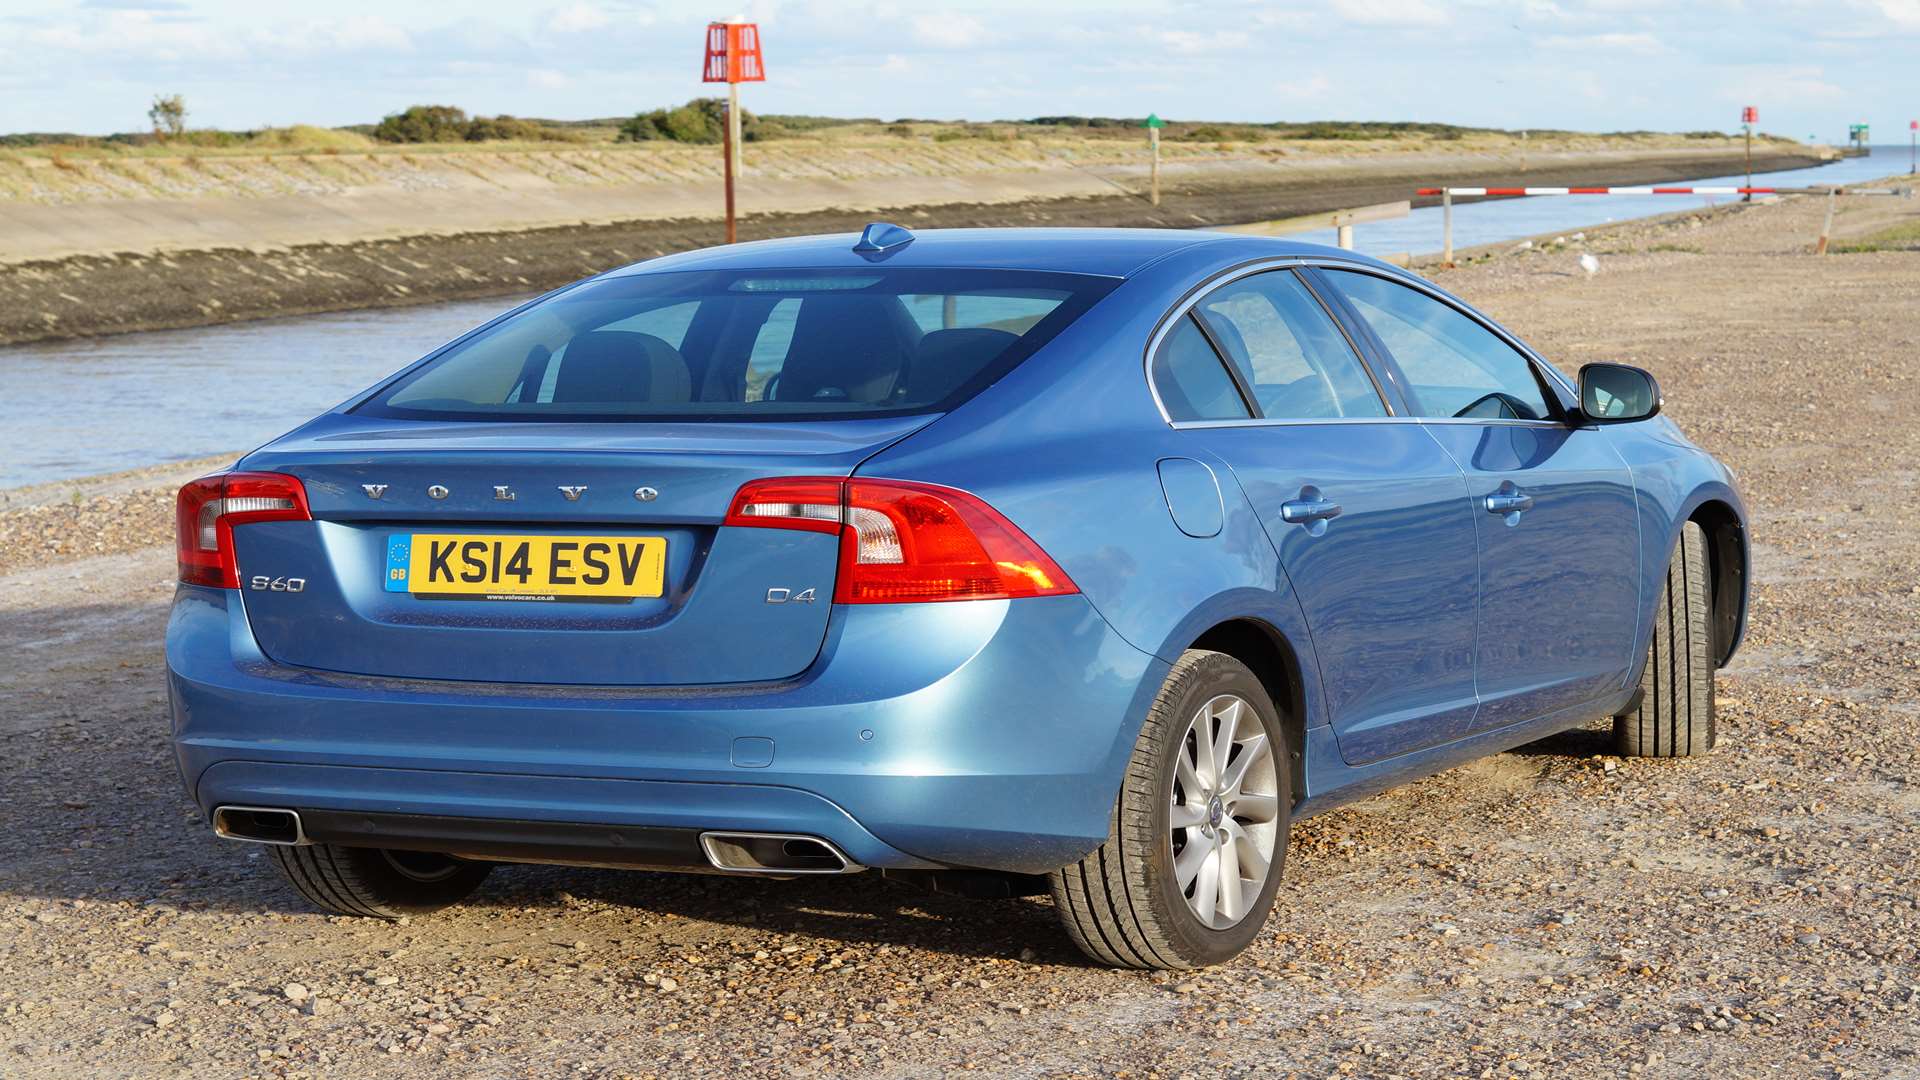 The steeply raked rear windscreen lends the S60 a coupe-like appearance